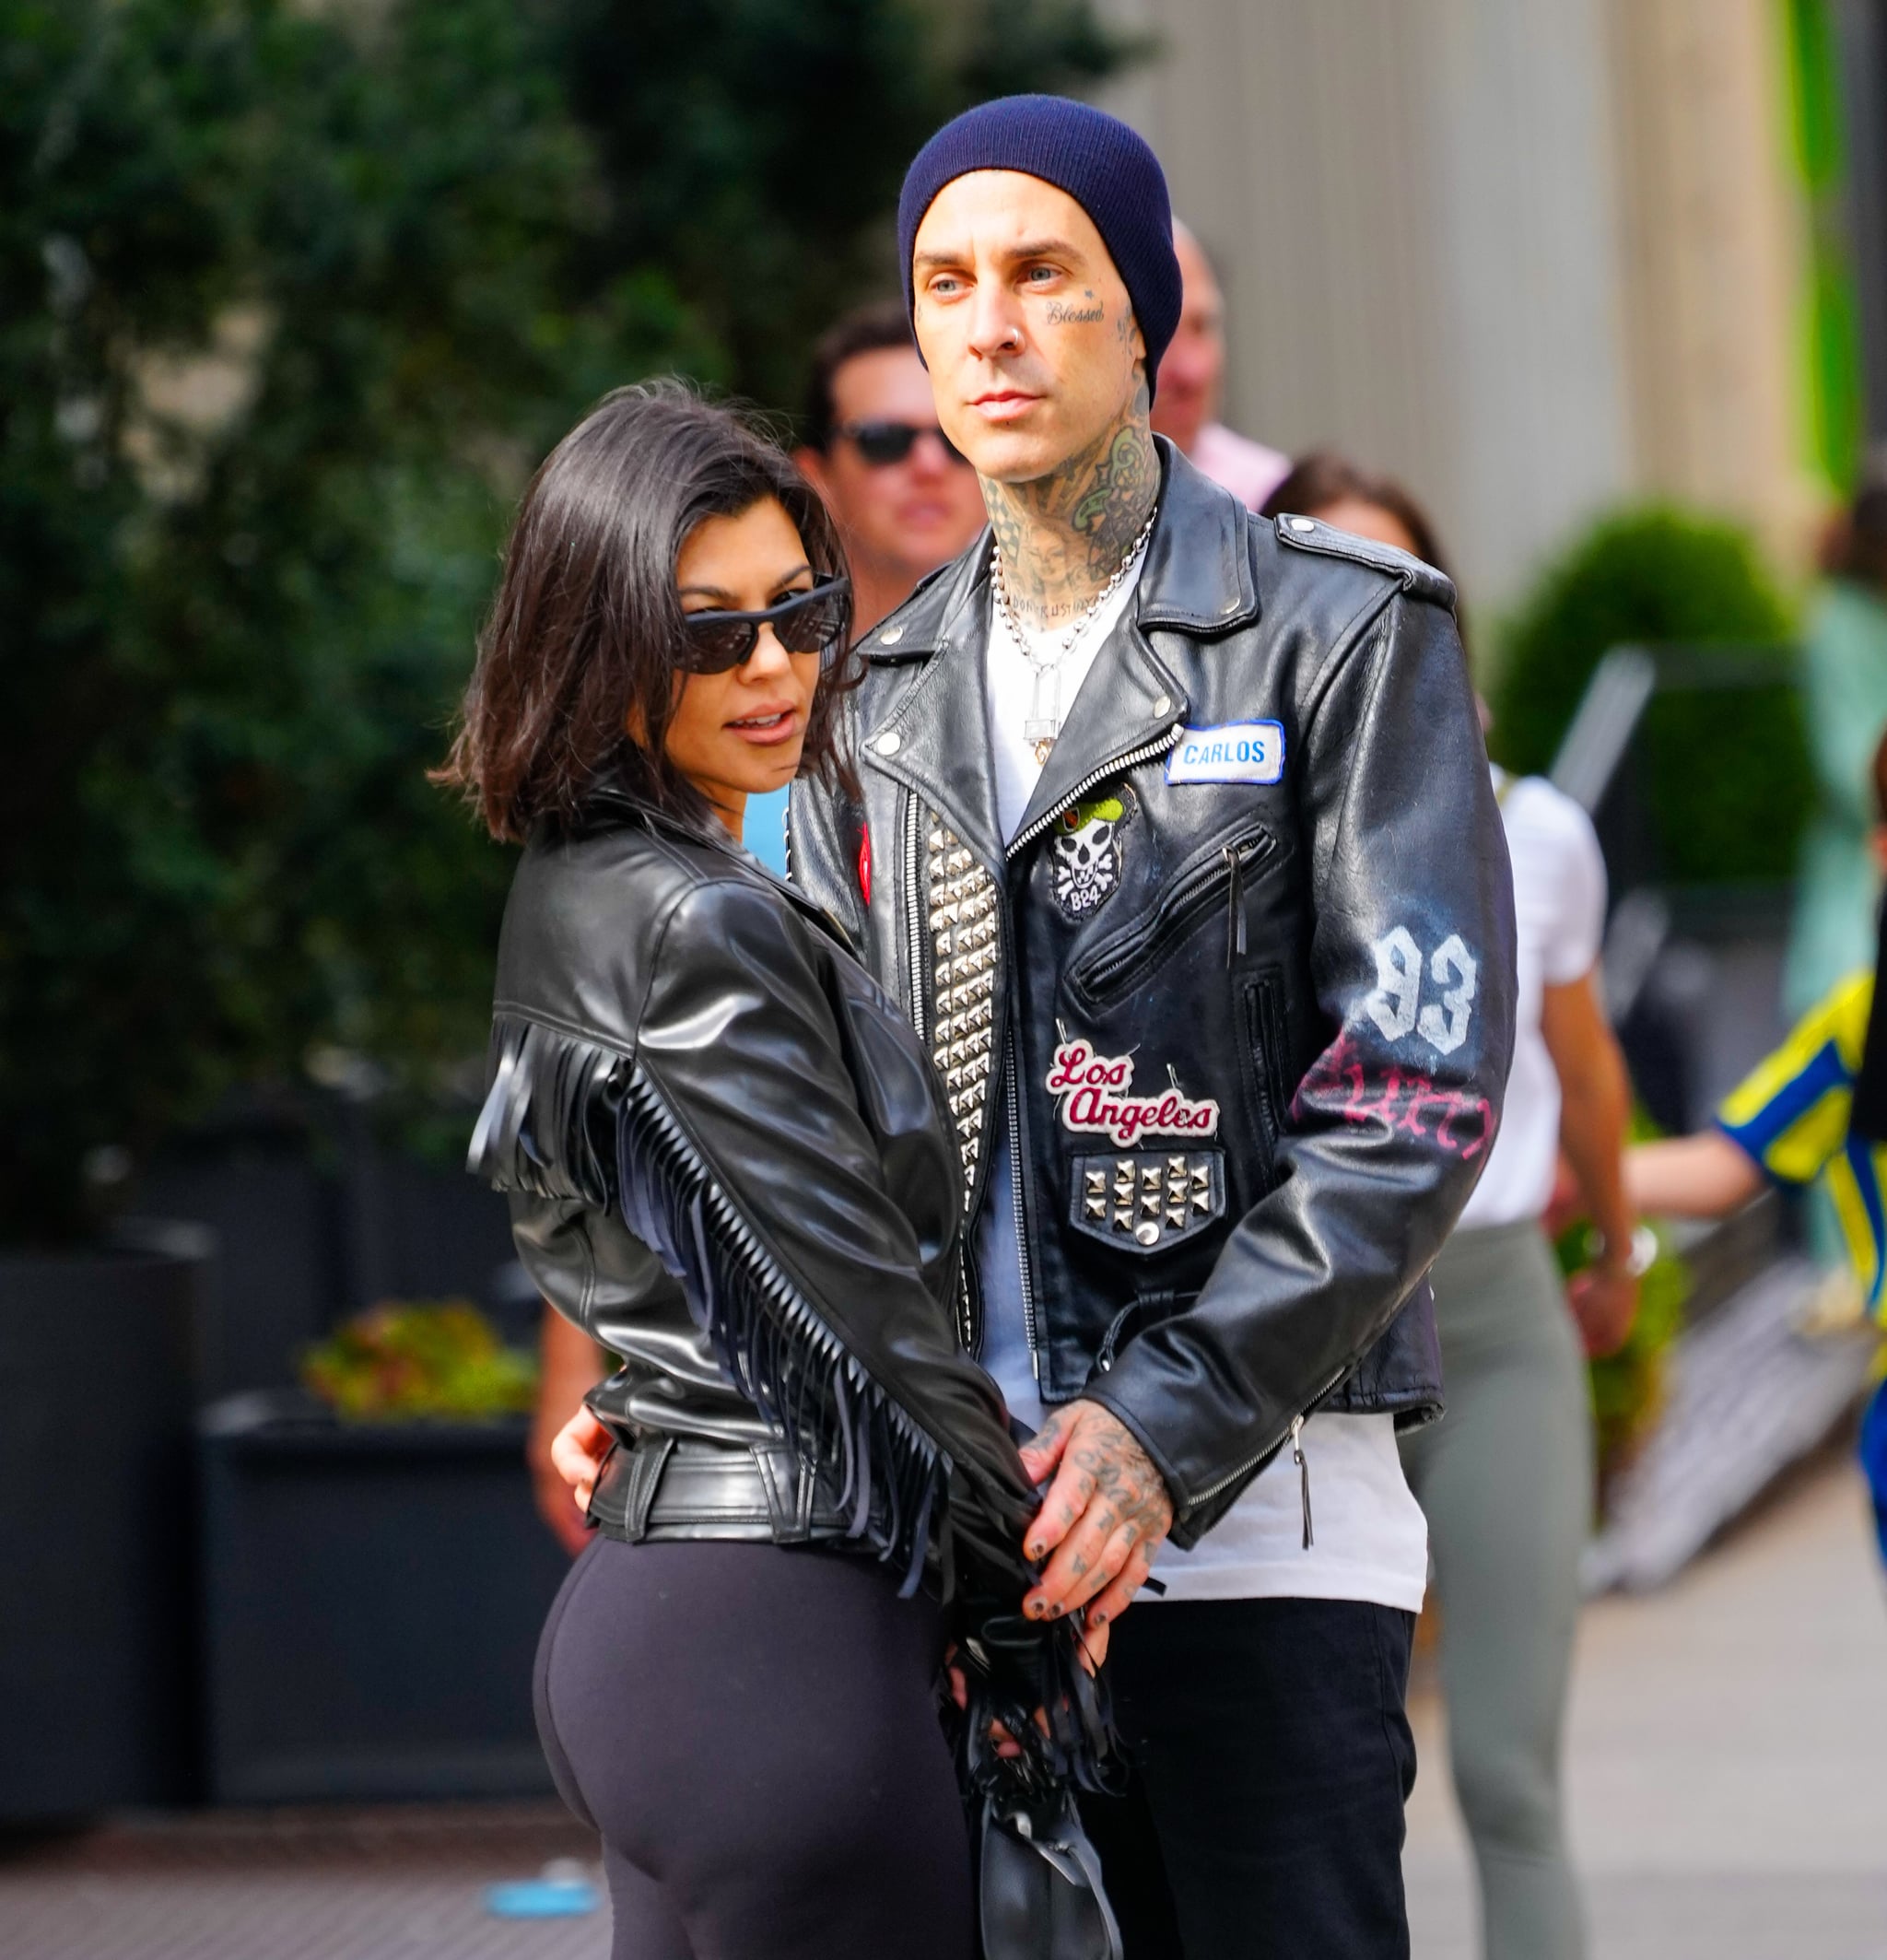 NEW YORK, NEW YORK - OCTOBER 16: Kourtney Kardashian and Travis Barker are seen on October 16, 2021 in New York City. (Photo by Gotham/GC Images)